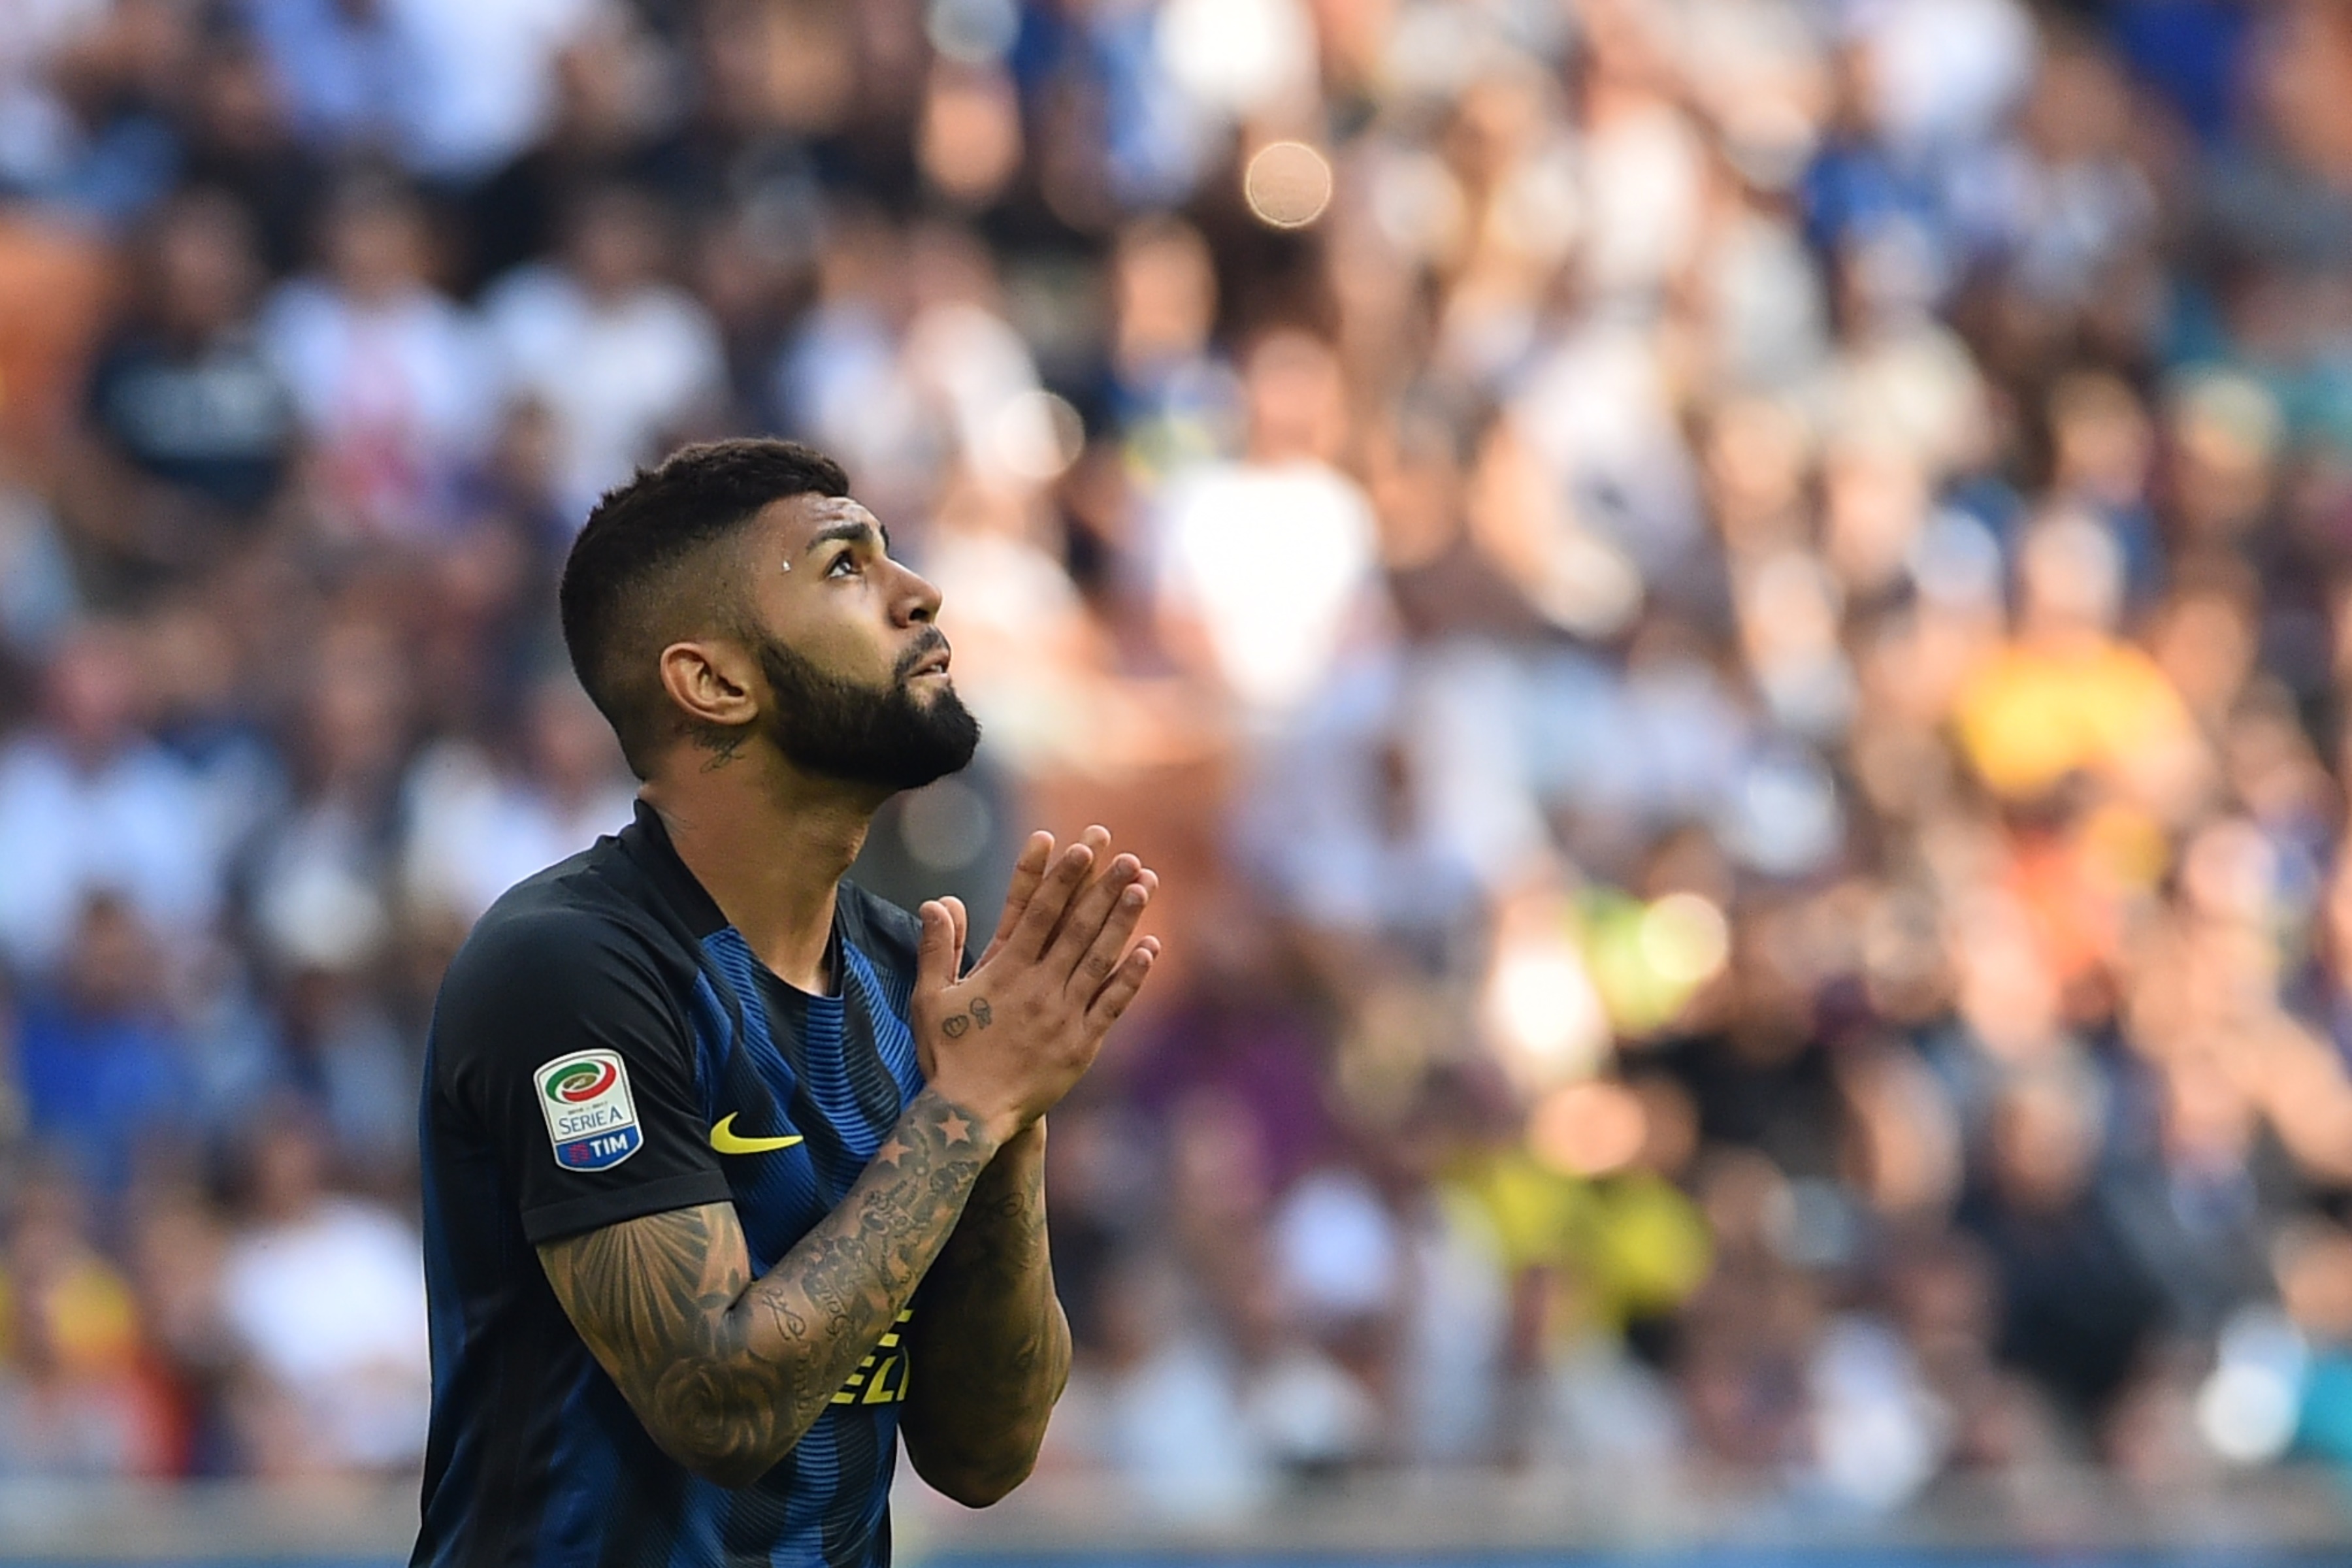 Inter Milan's Brazilian forward Gabriel Barbosa reacts during the Italian Serie A football match Inter Milan vs Bologna at the San Siro stadium in Milan on September 25,  2016. (Photo by credit should read GIUSEPPE CACACE/AFP/Getty Images)